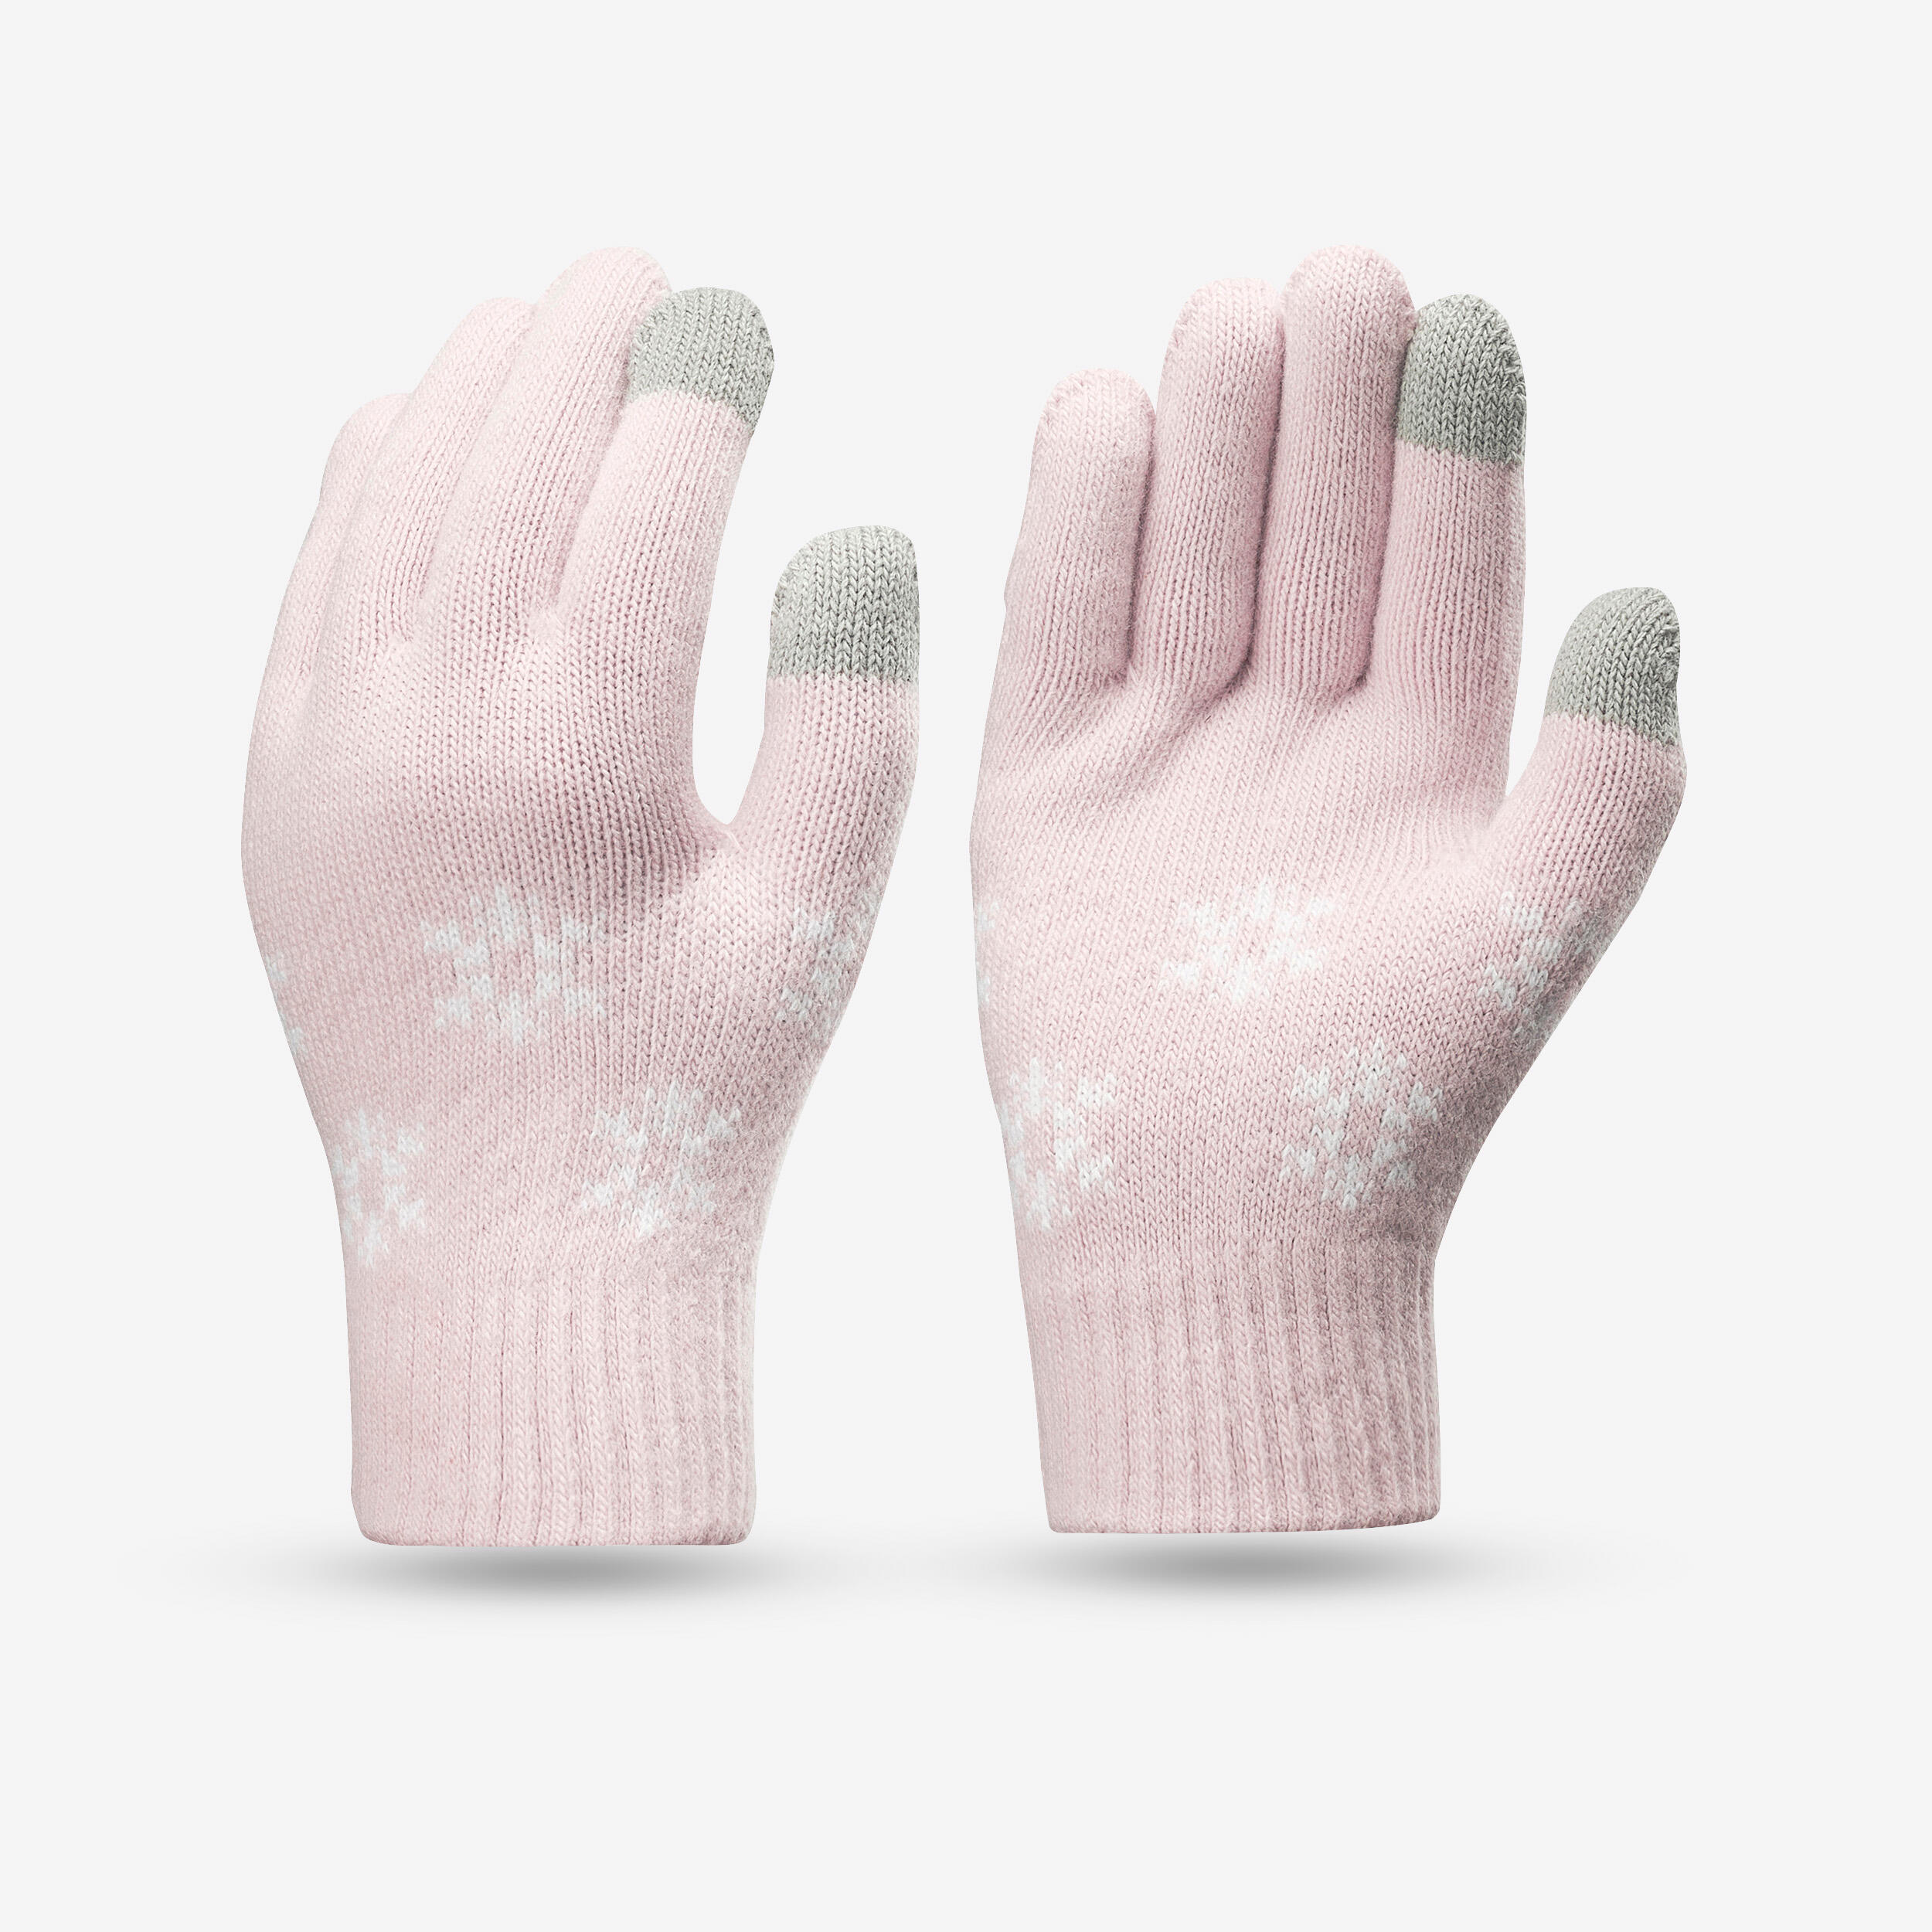 KIDS’ TOUCHSCREEN COMPATIBLE HIKING GLOVES - SH100 KNITTED - AGED 4-14 YEARS 1/3